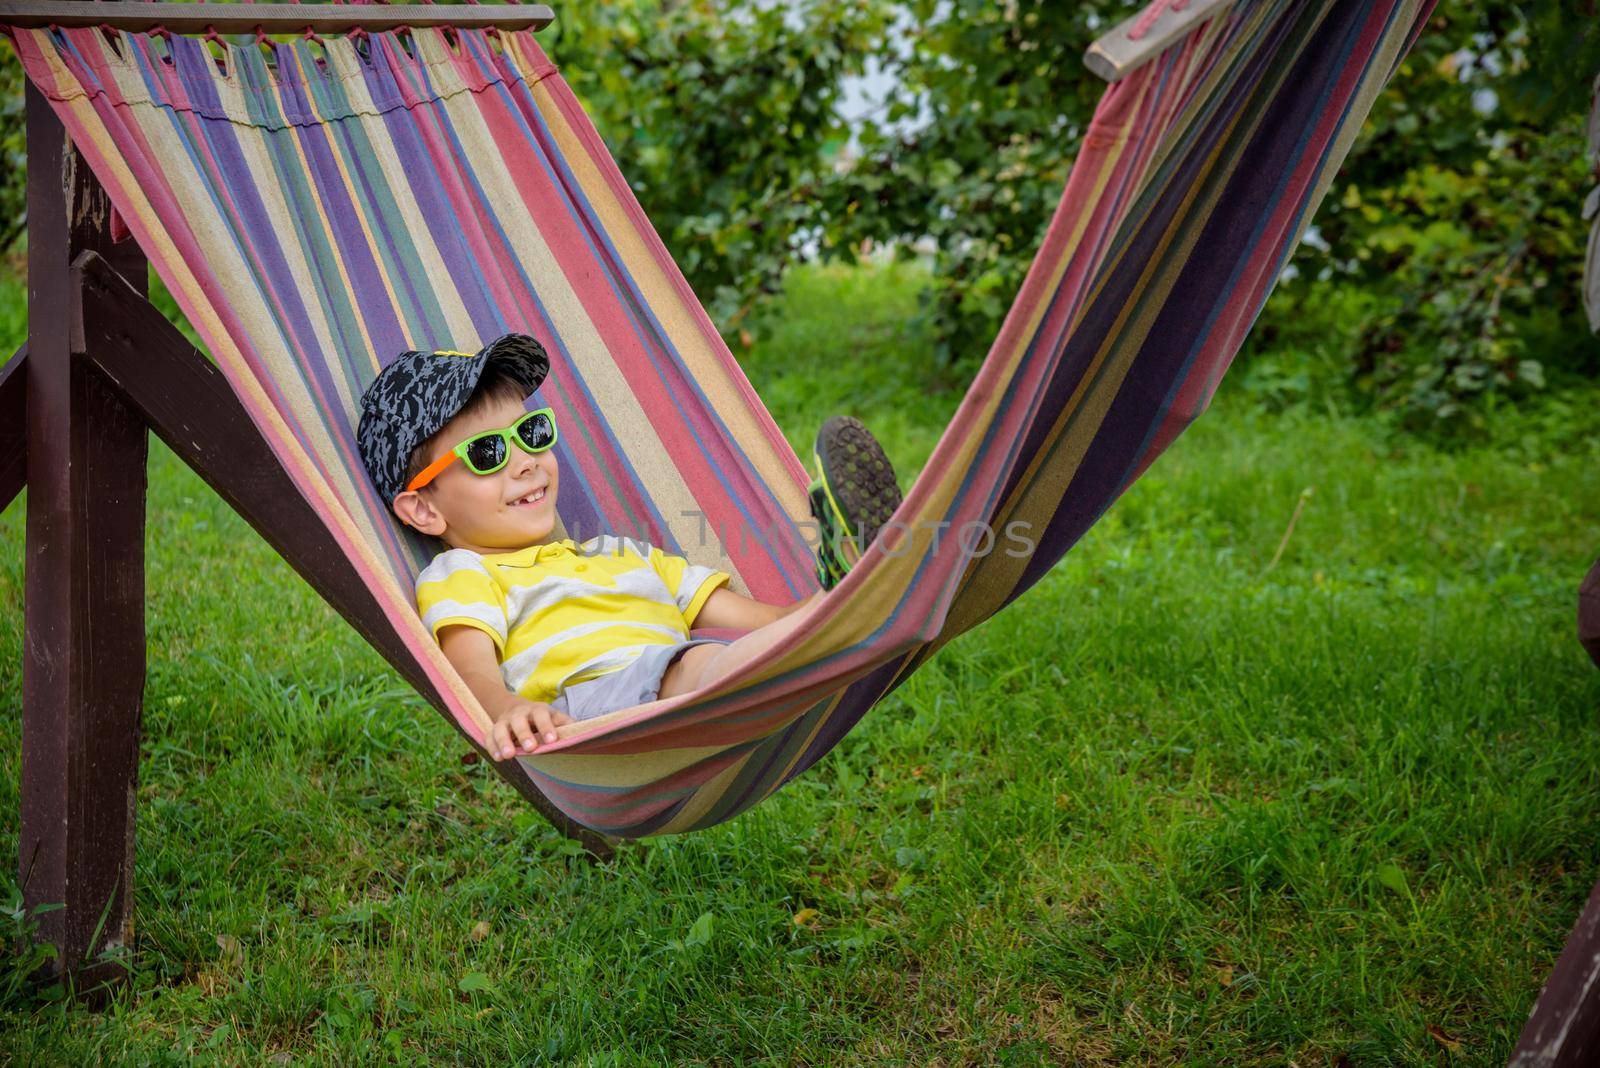 Cute little Caucasian boy relaxing and having fun in multicolored hammock in backyard or outdoor playground. Summer active leisure for kids. Child swinging on hammock. Activities for children.